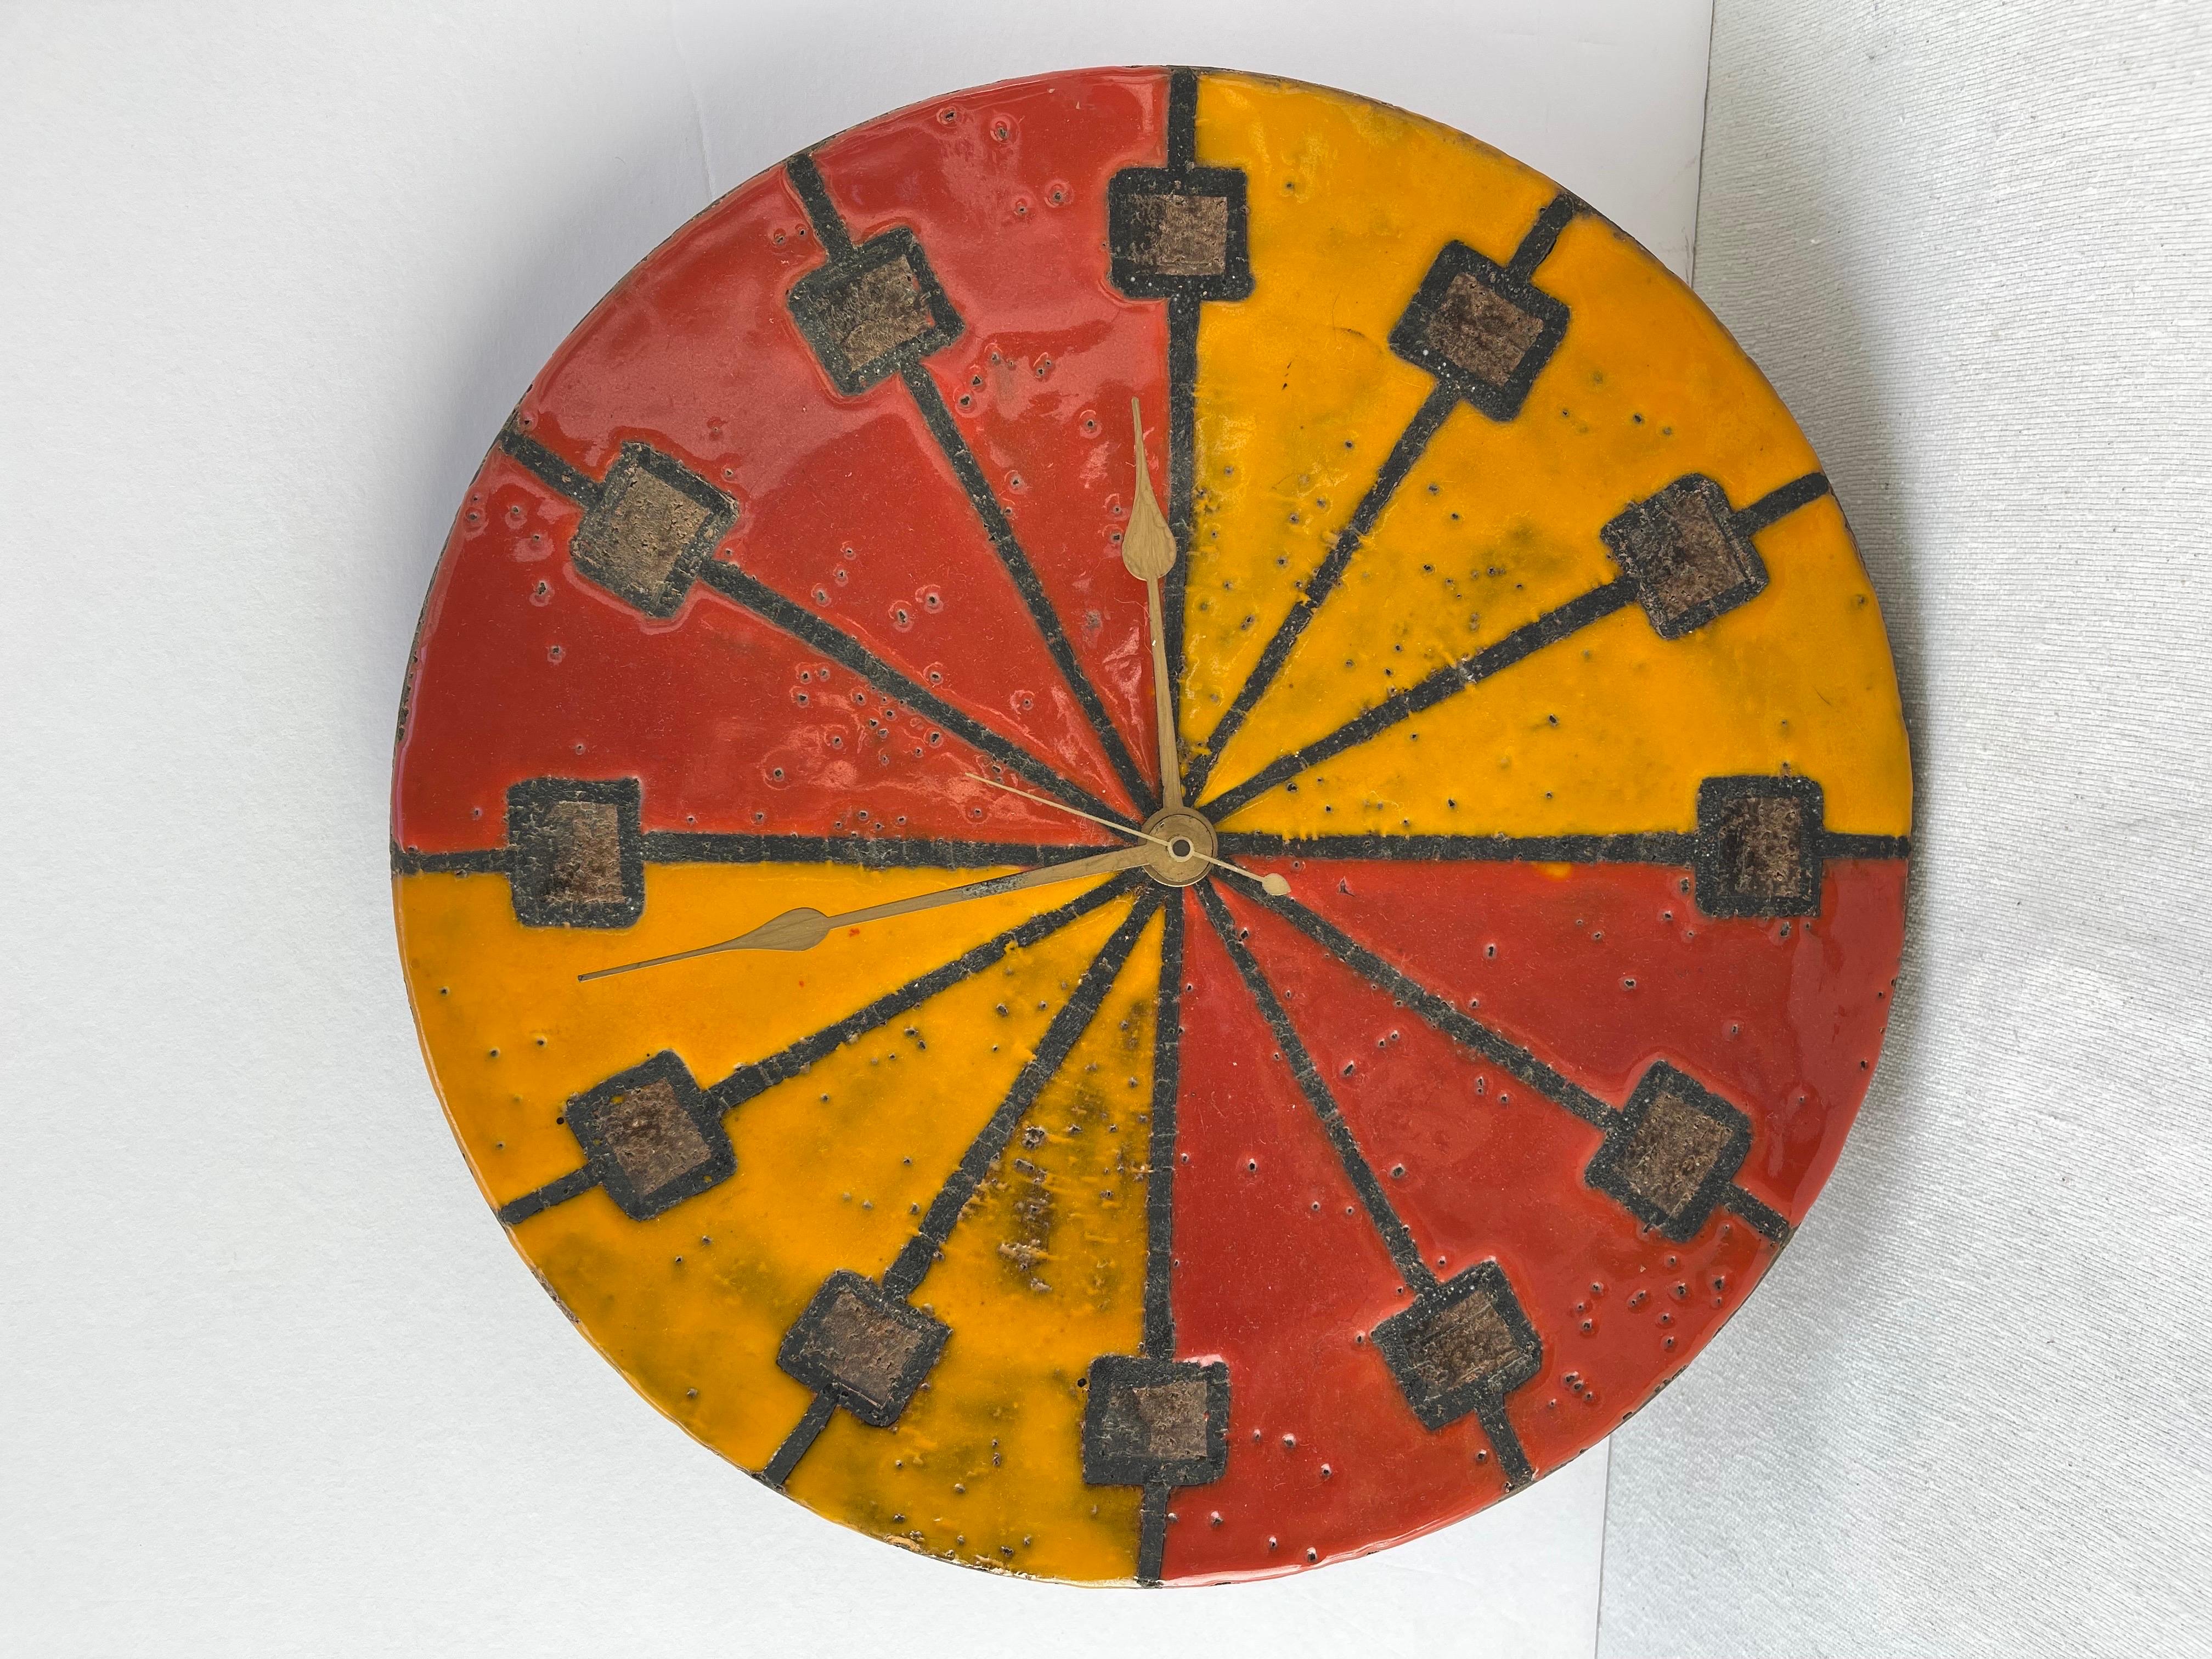 Aldo Londi for Bitossi Mid Century Ceramic Wall Clock. Manufactured by Howard Miller the American designer. The ceramic face was designed by Bitossi and features a red/orange and yellow glazed finish over brown stoneware. Tis modernist Meridian